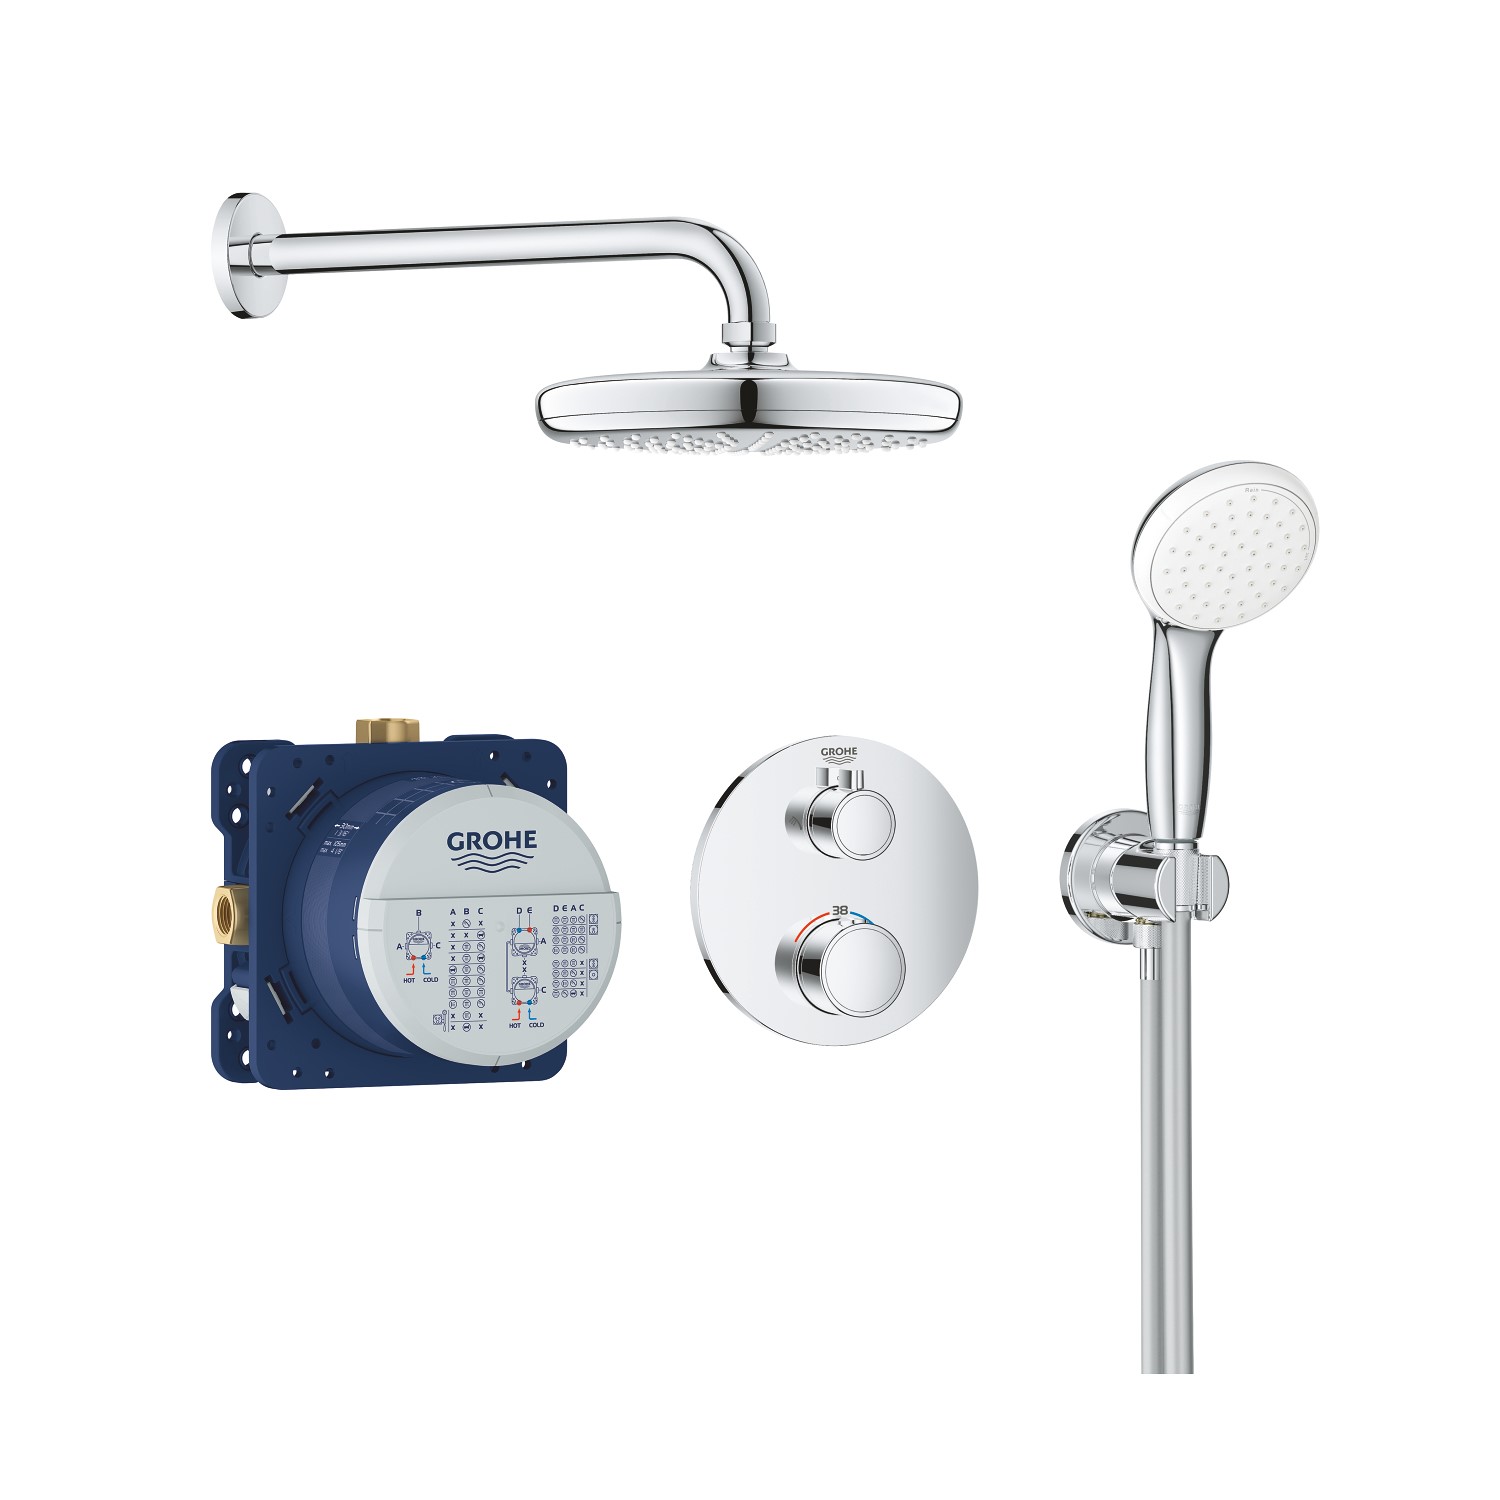 Grohe Tempesta 210 Concealed Thermostatic Mixer Shower with Ceiling Shower Head & Handset